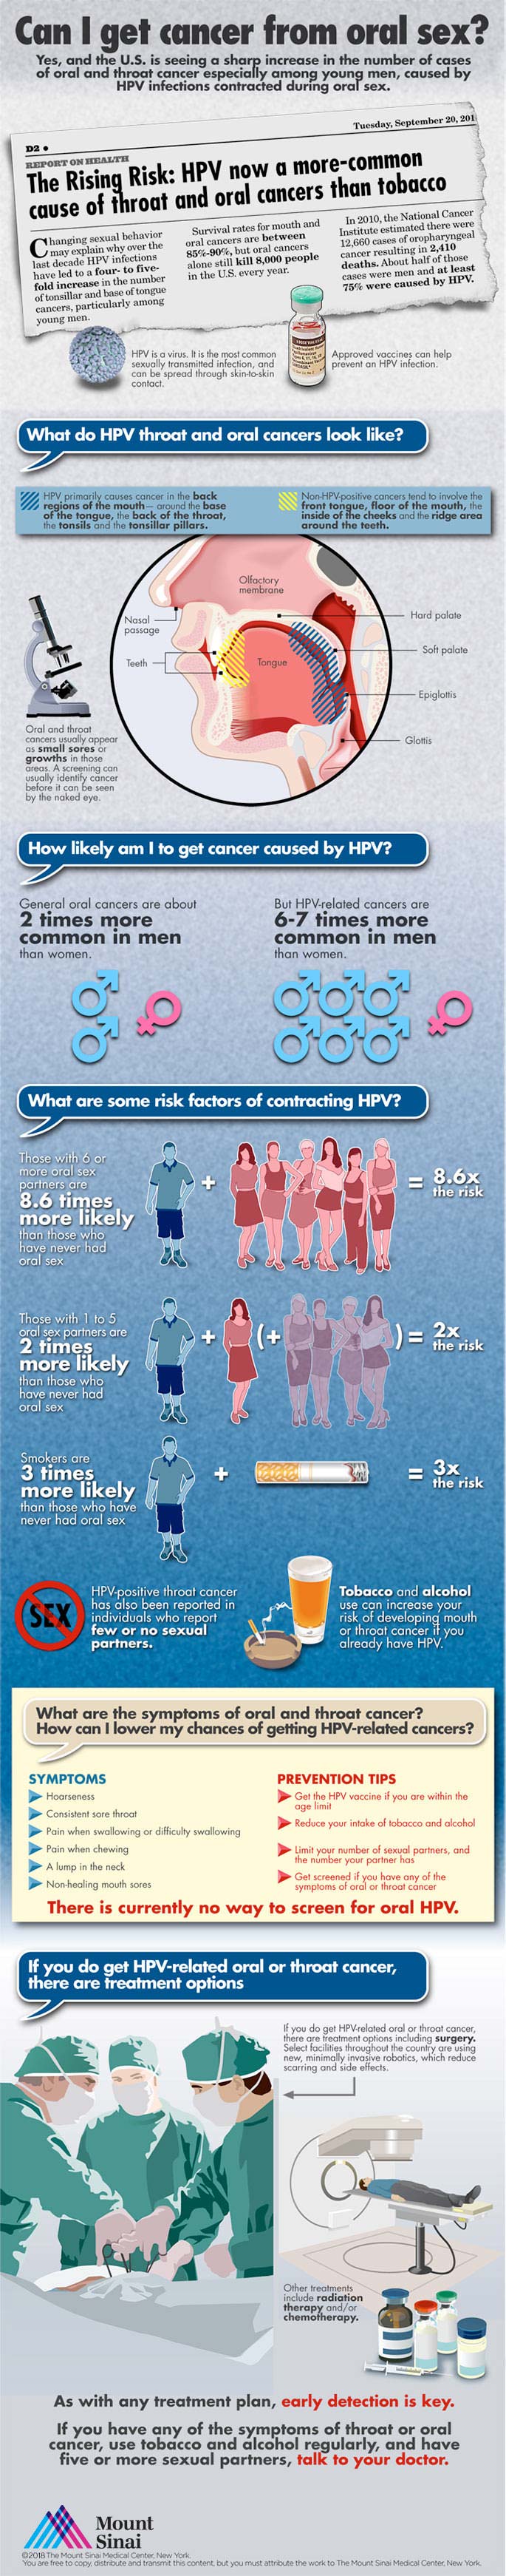 Hpv Oral Cancer Infographic Mount Sinai New York 